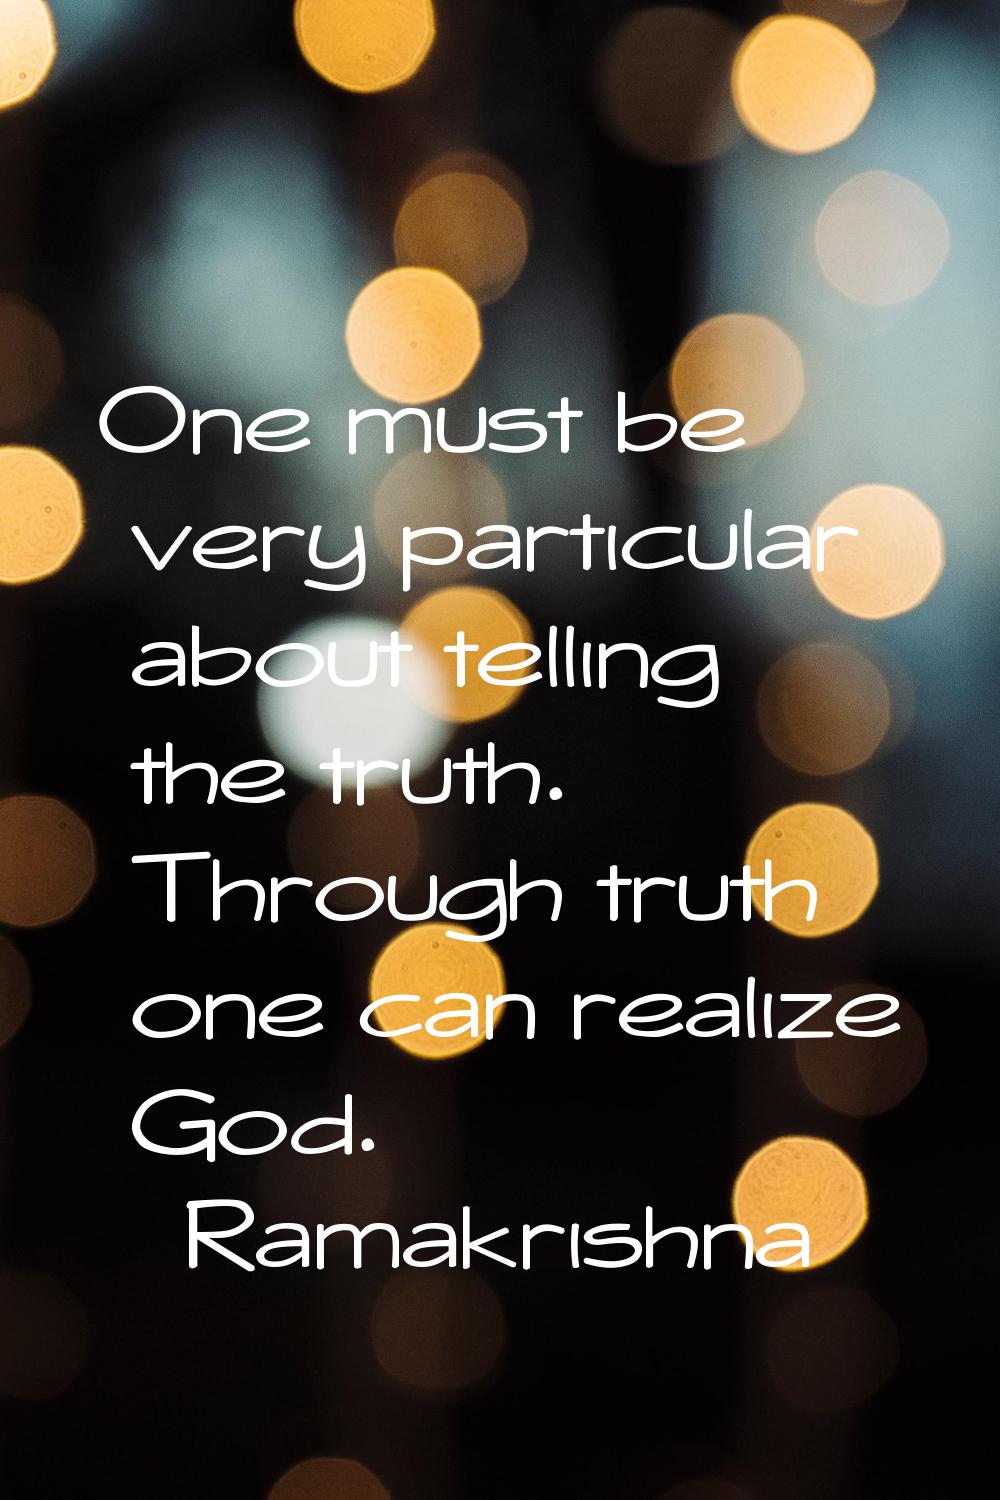 One must be very particular about telling the truth. Through truth one can realize God.